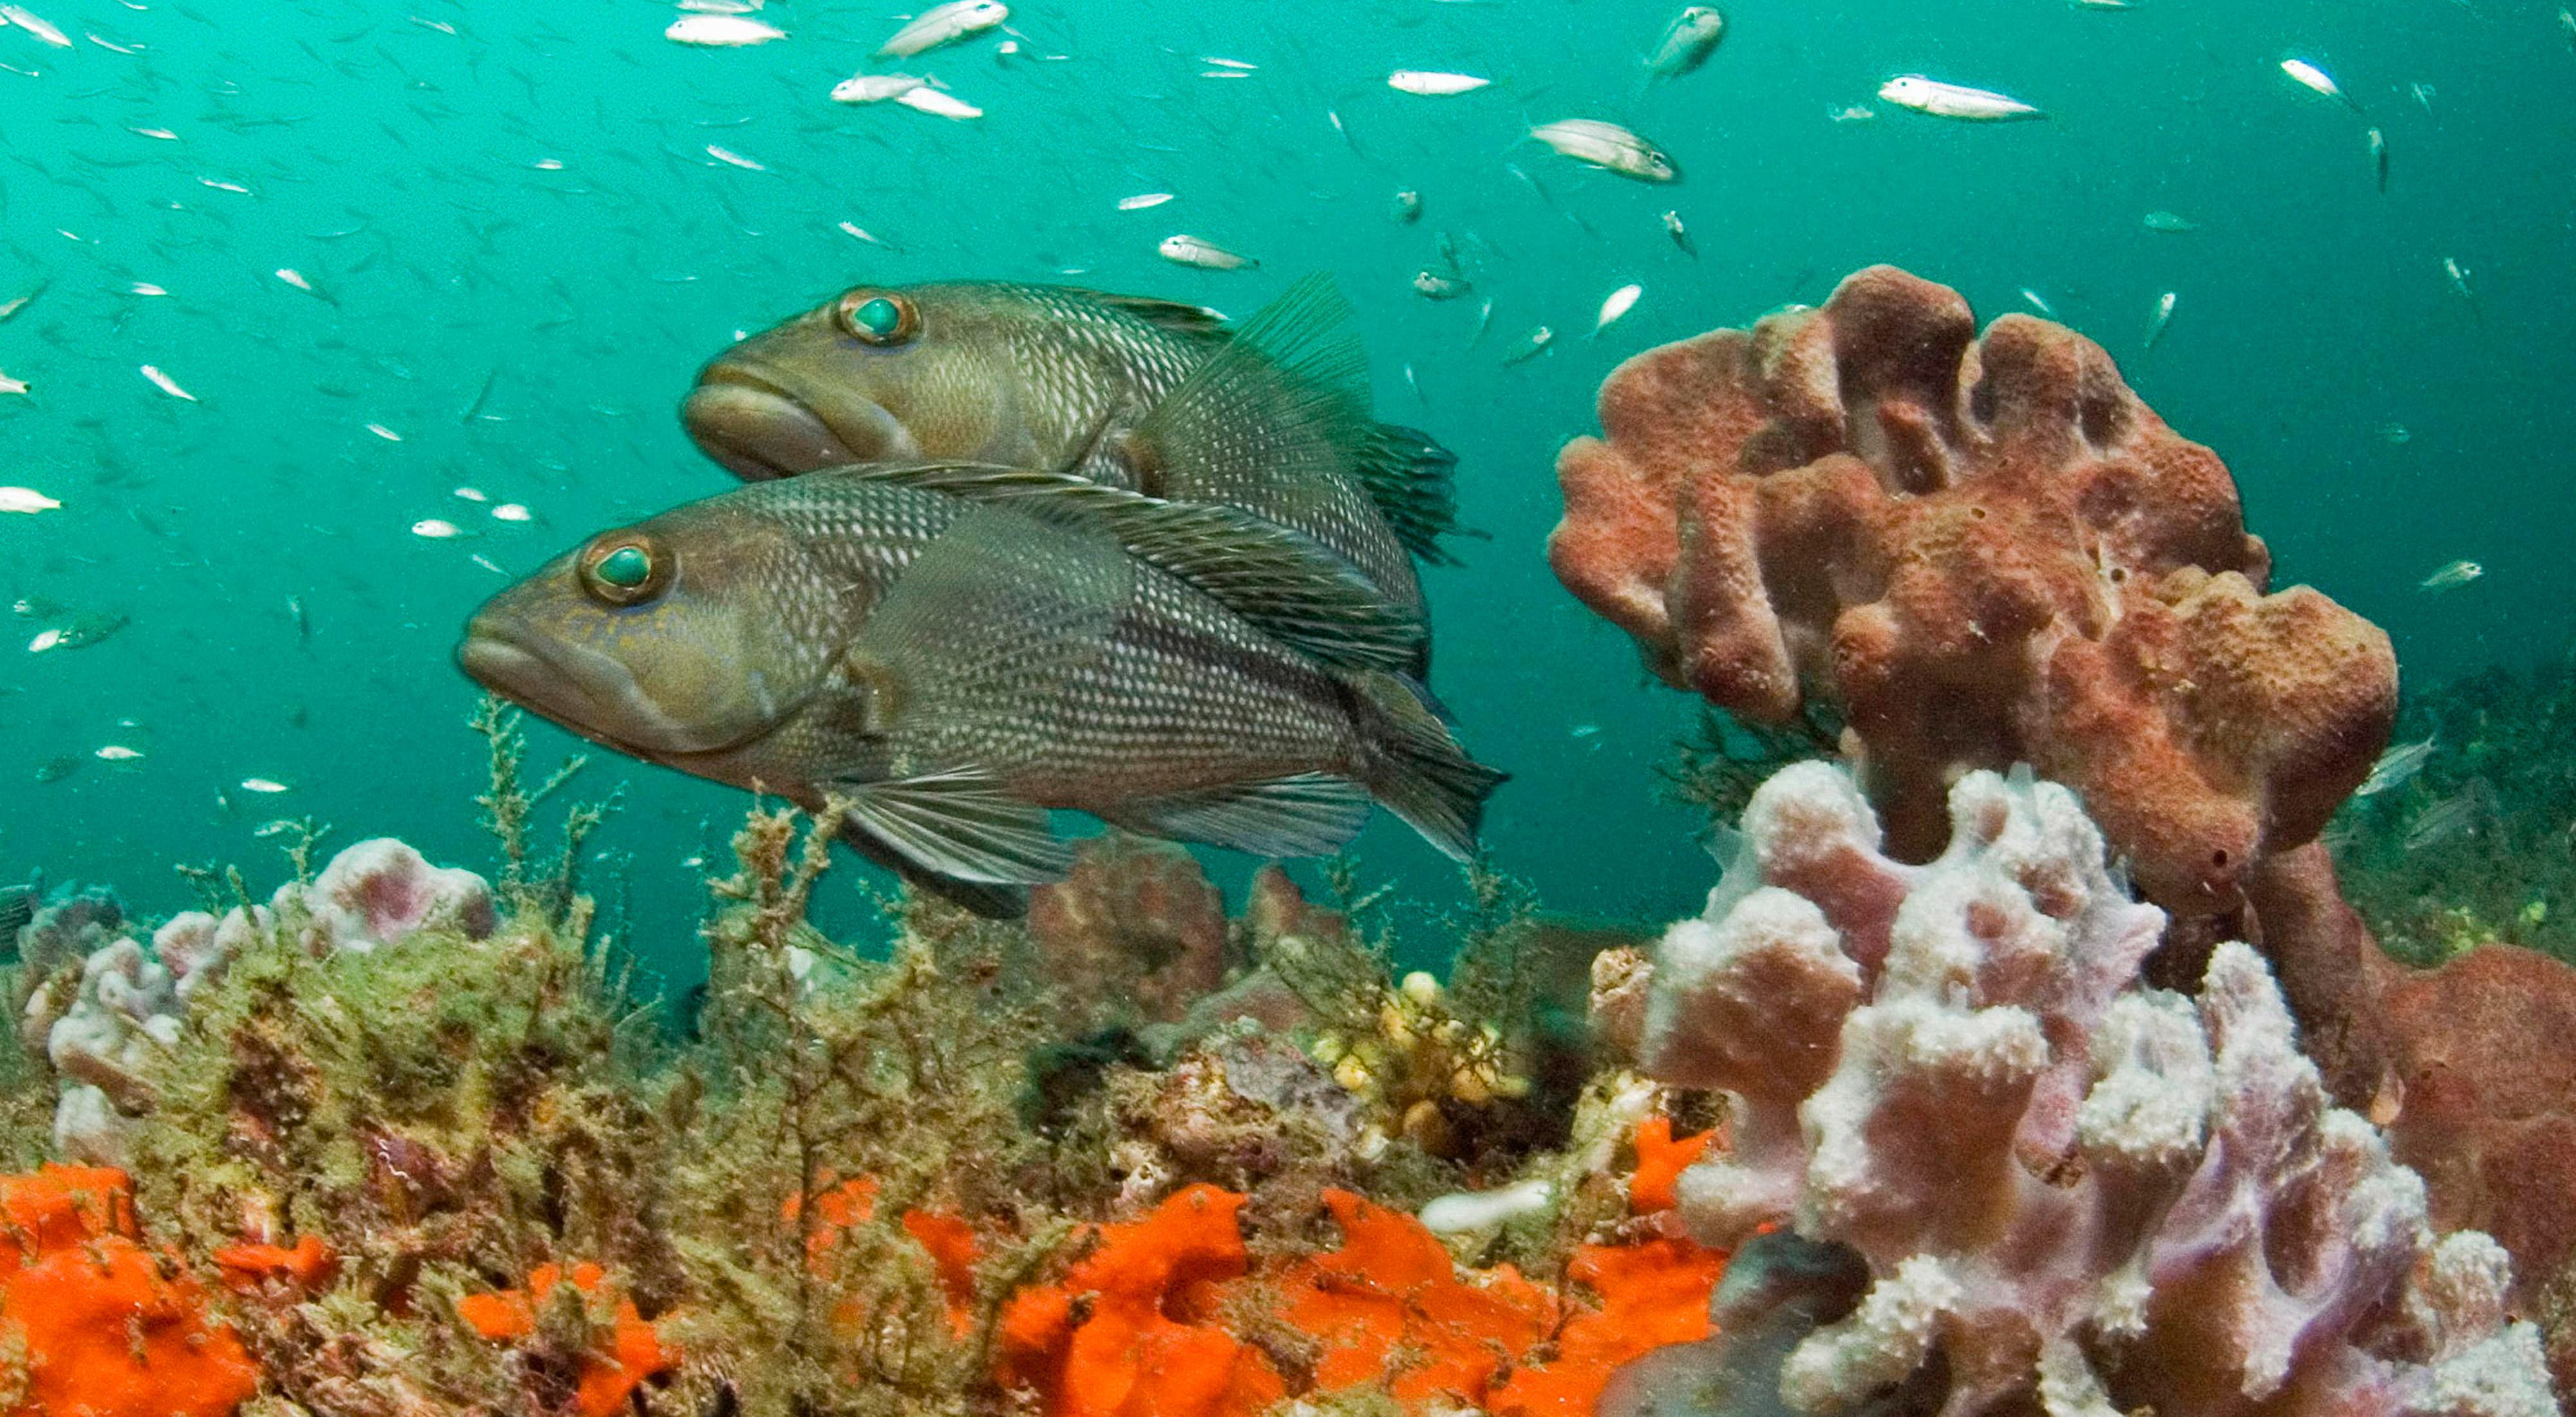 Two black sea bass swimming over coral at Grays Reef National Marine Sanctuary off the coast of Georgia